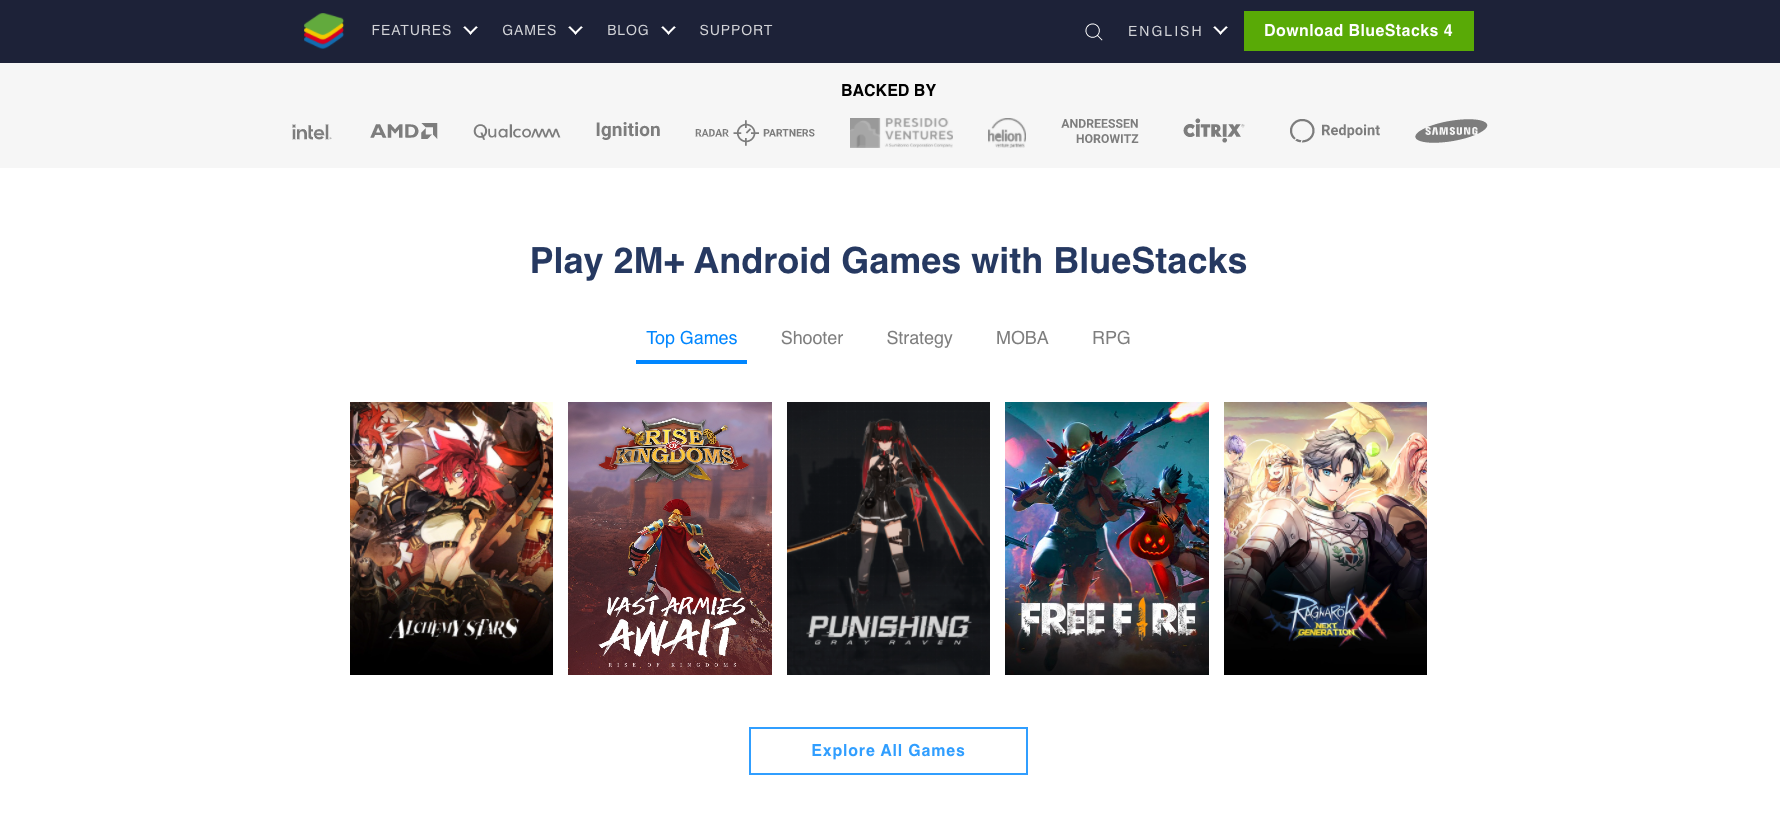 BlueStacks' website, advertising its most popular games and industry partners.